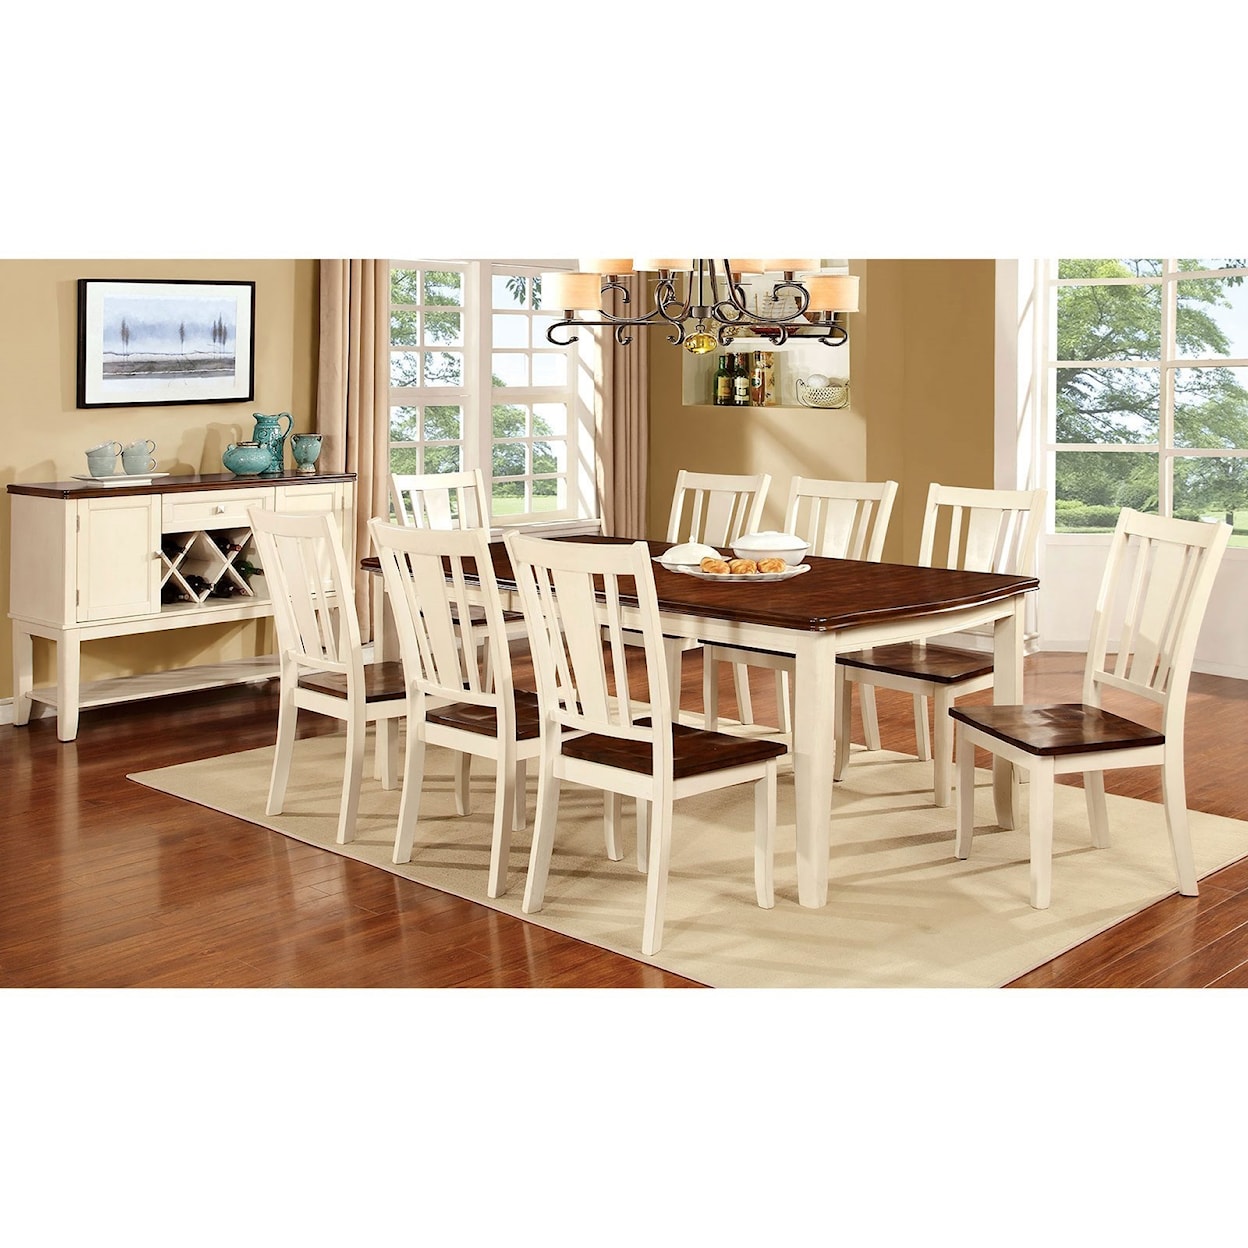 Furniture of America Dover II Rectangular Dining Table